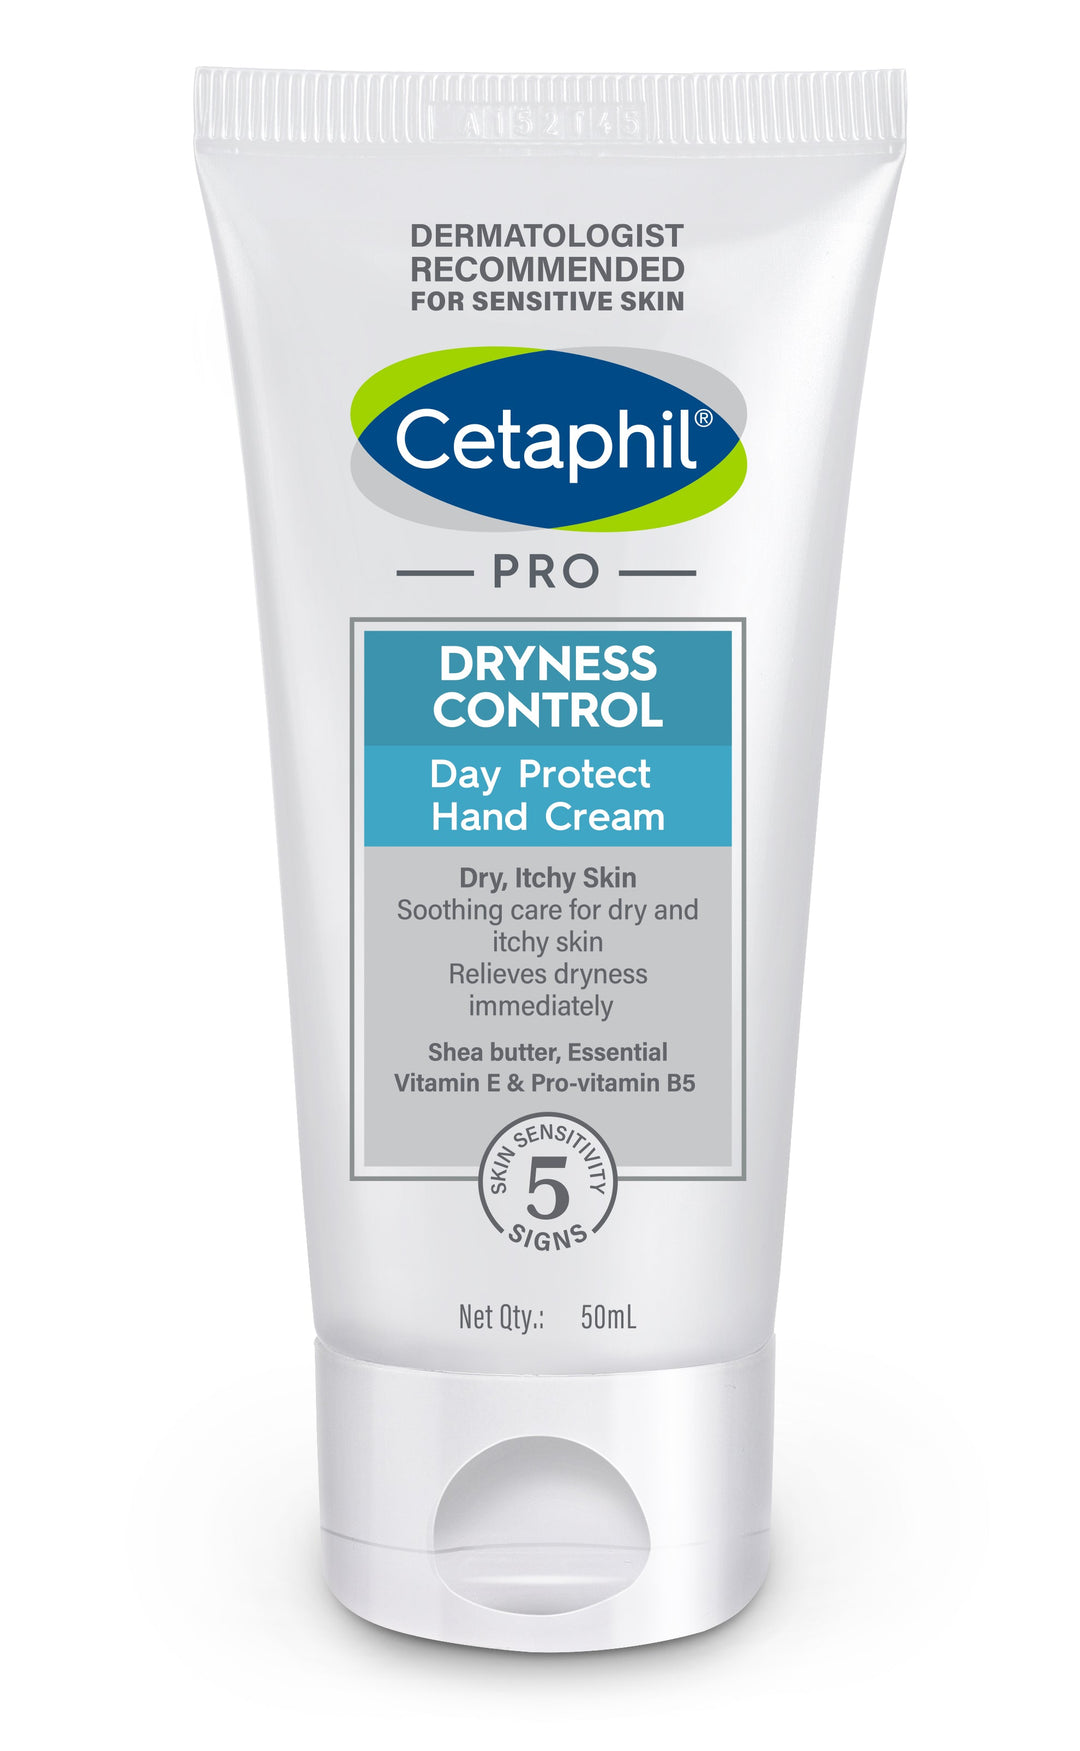 Cetaphil-Pro-Dryness-Control-Day-Protect-Hand-Cream